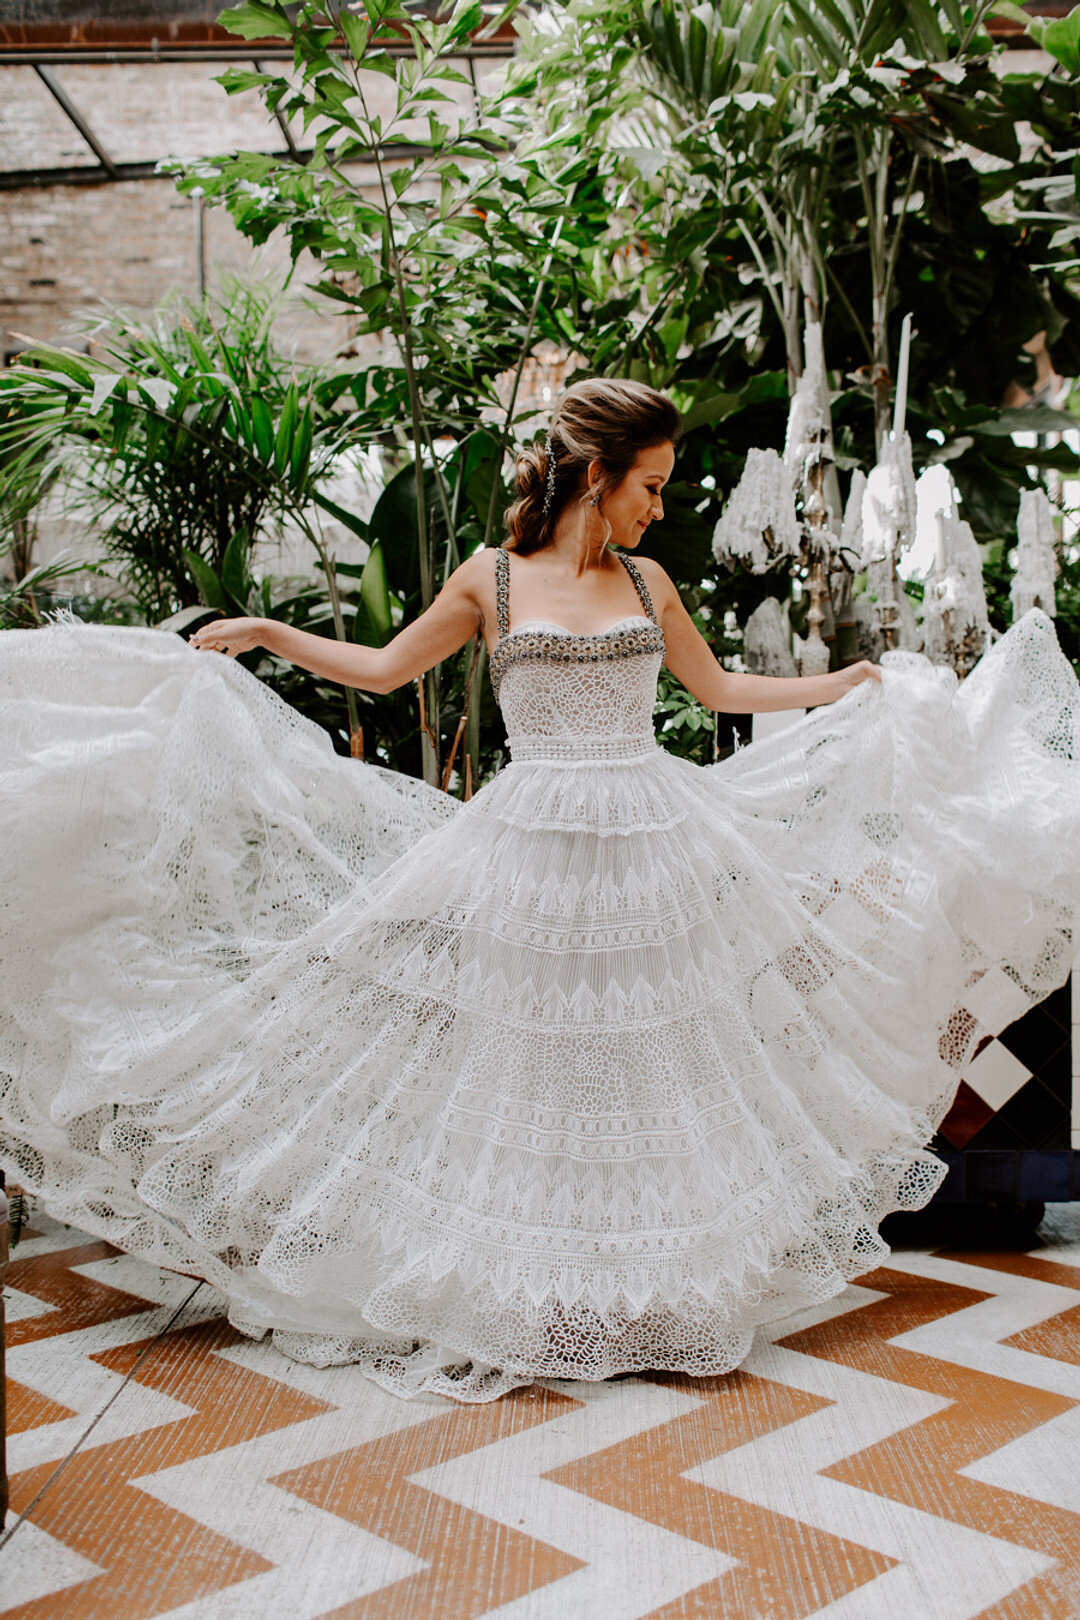 Moroccan Meets European Vintage at Beatnik captured by Colette Marie Photography